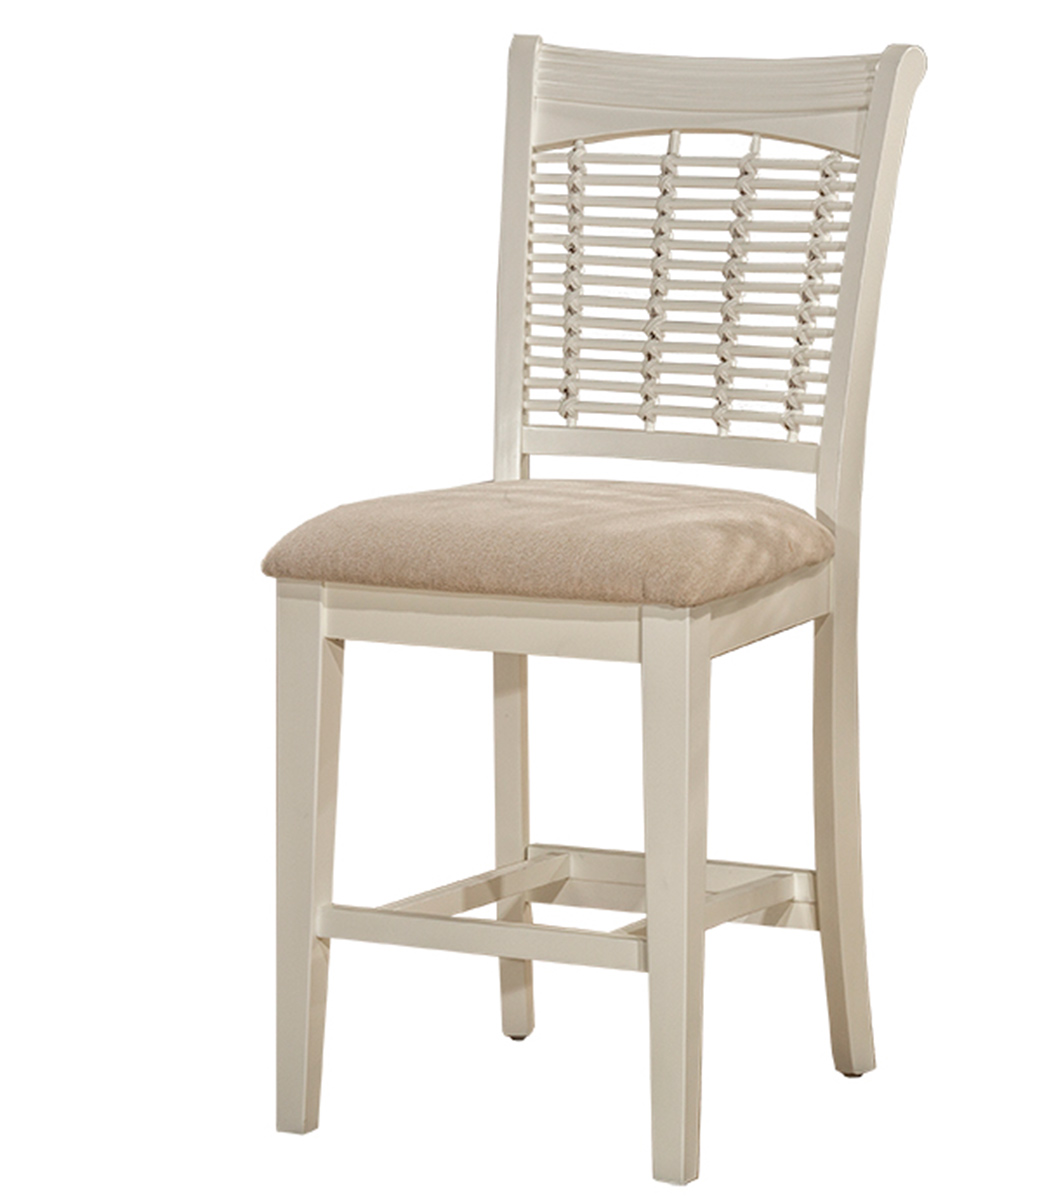 Hillsdale Bayberry Non-Swivel Counter Stool - White